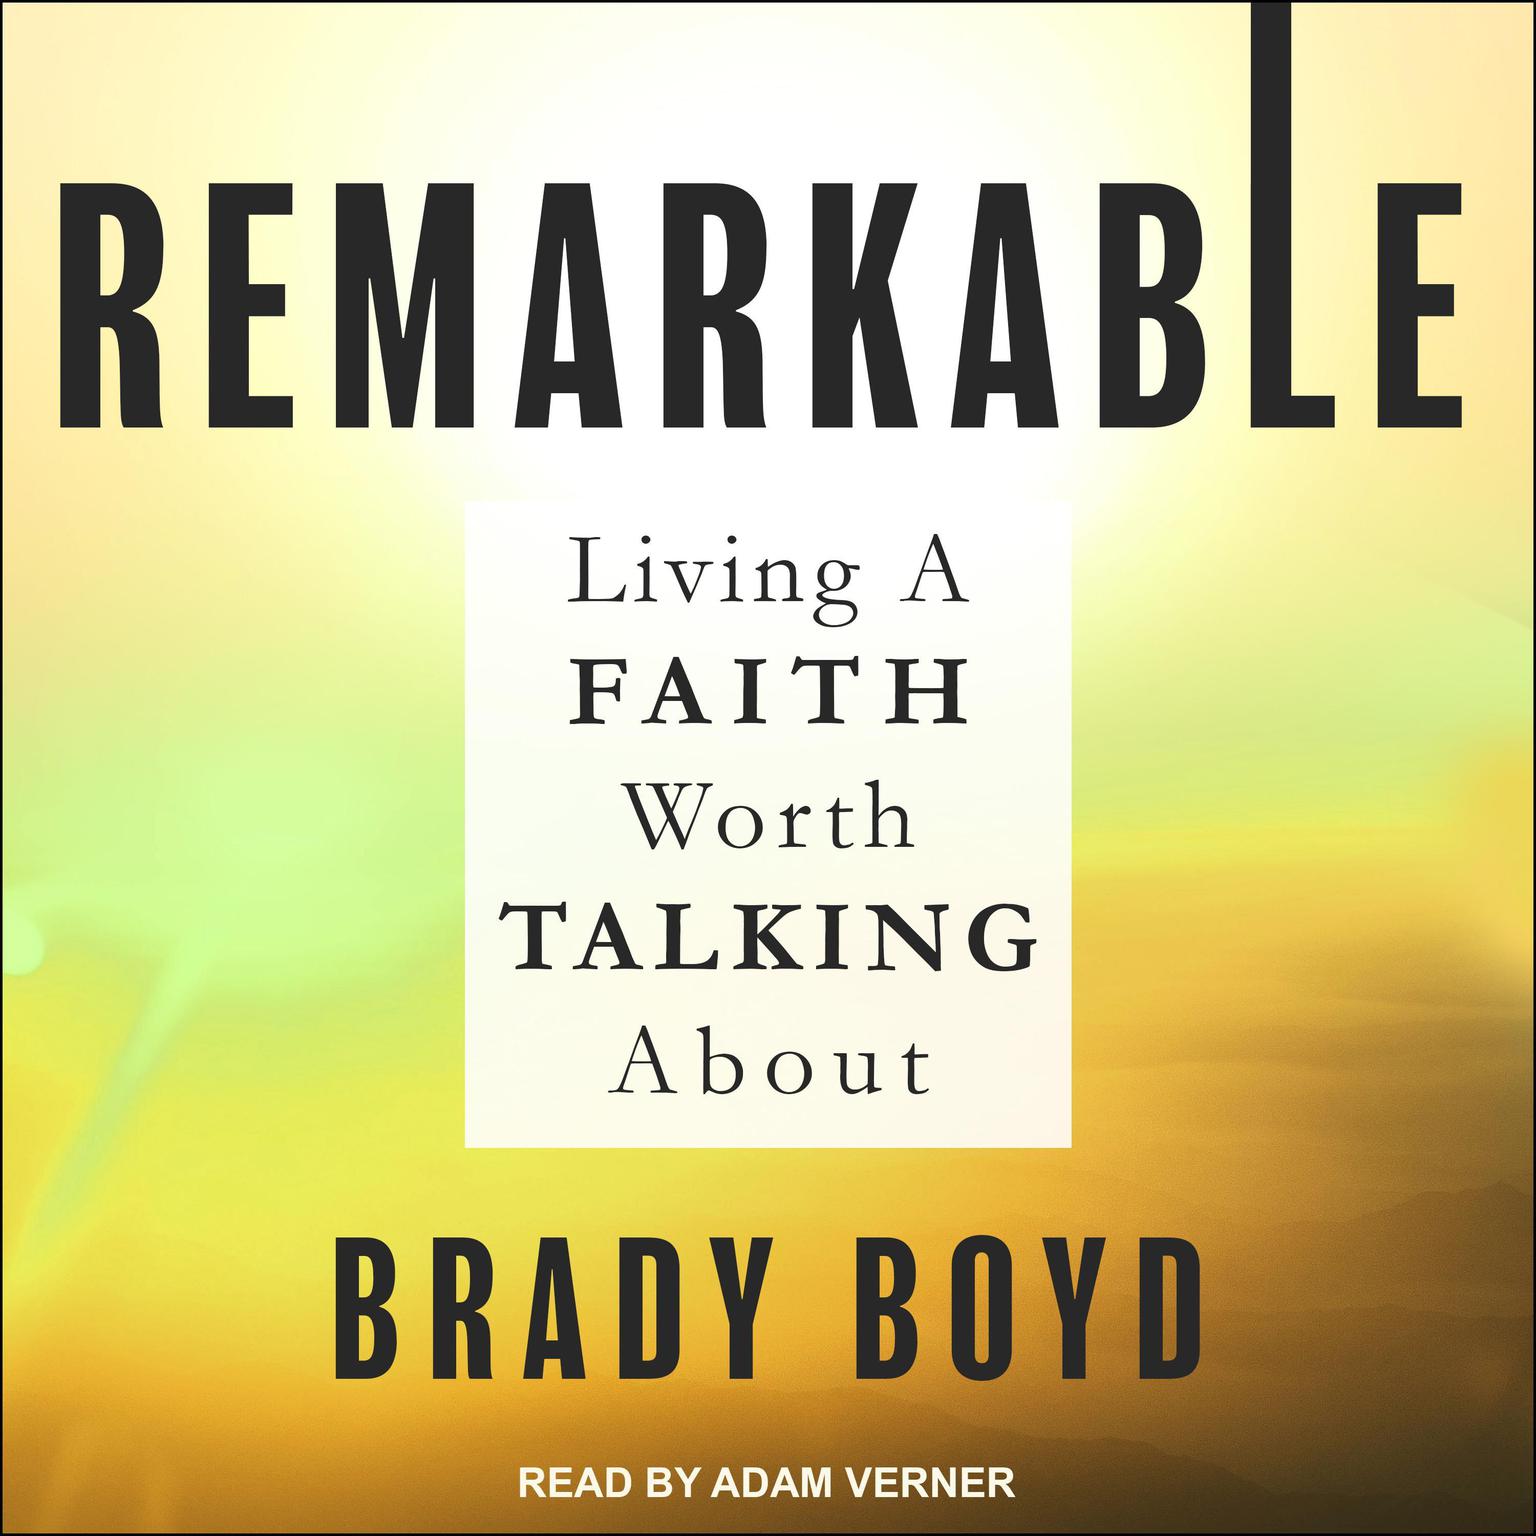 Remarkable: Living a Faith Worth Talking About Audiobook, by Brady Boyd